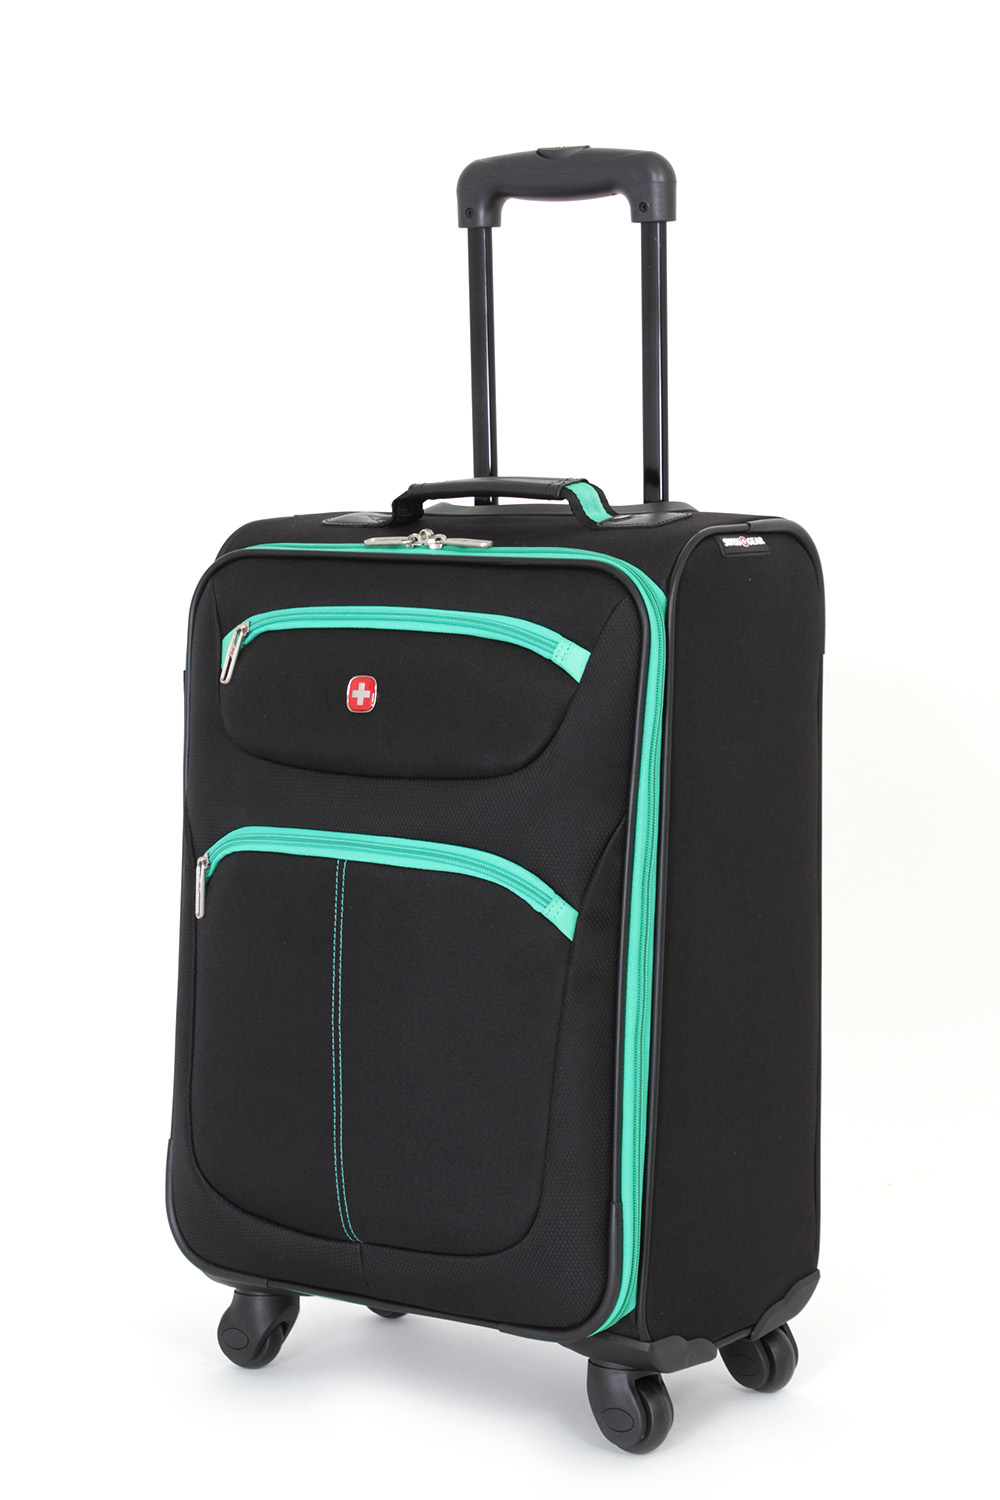 SWISSGEAR 6190 20” Carry-on Spinner Luggage